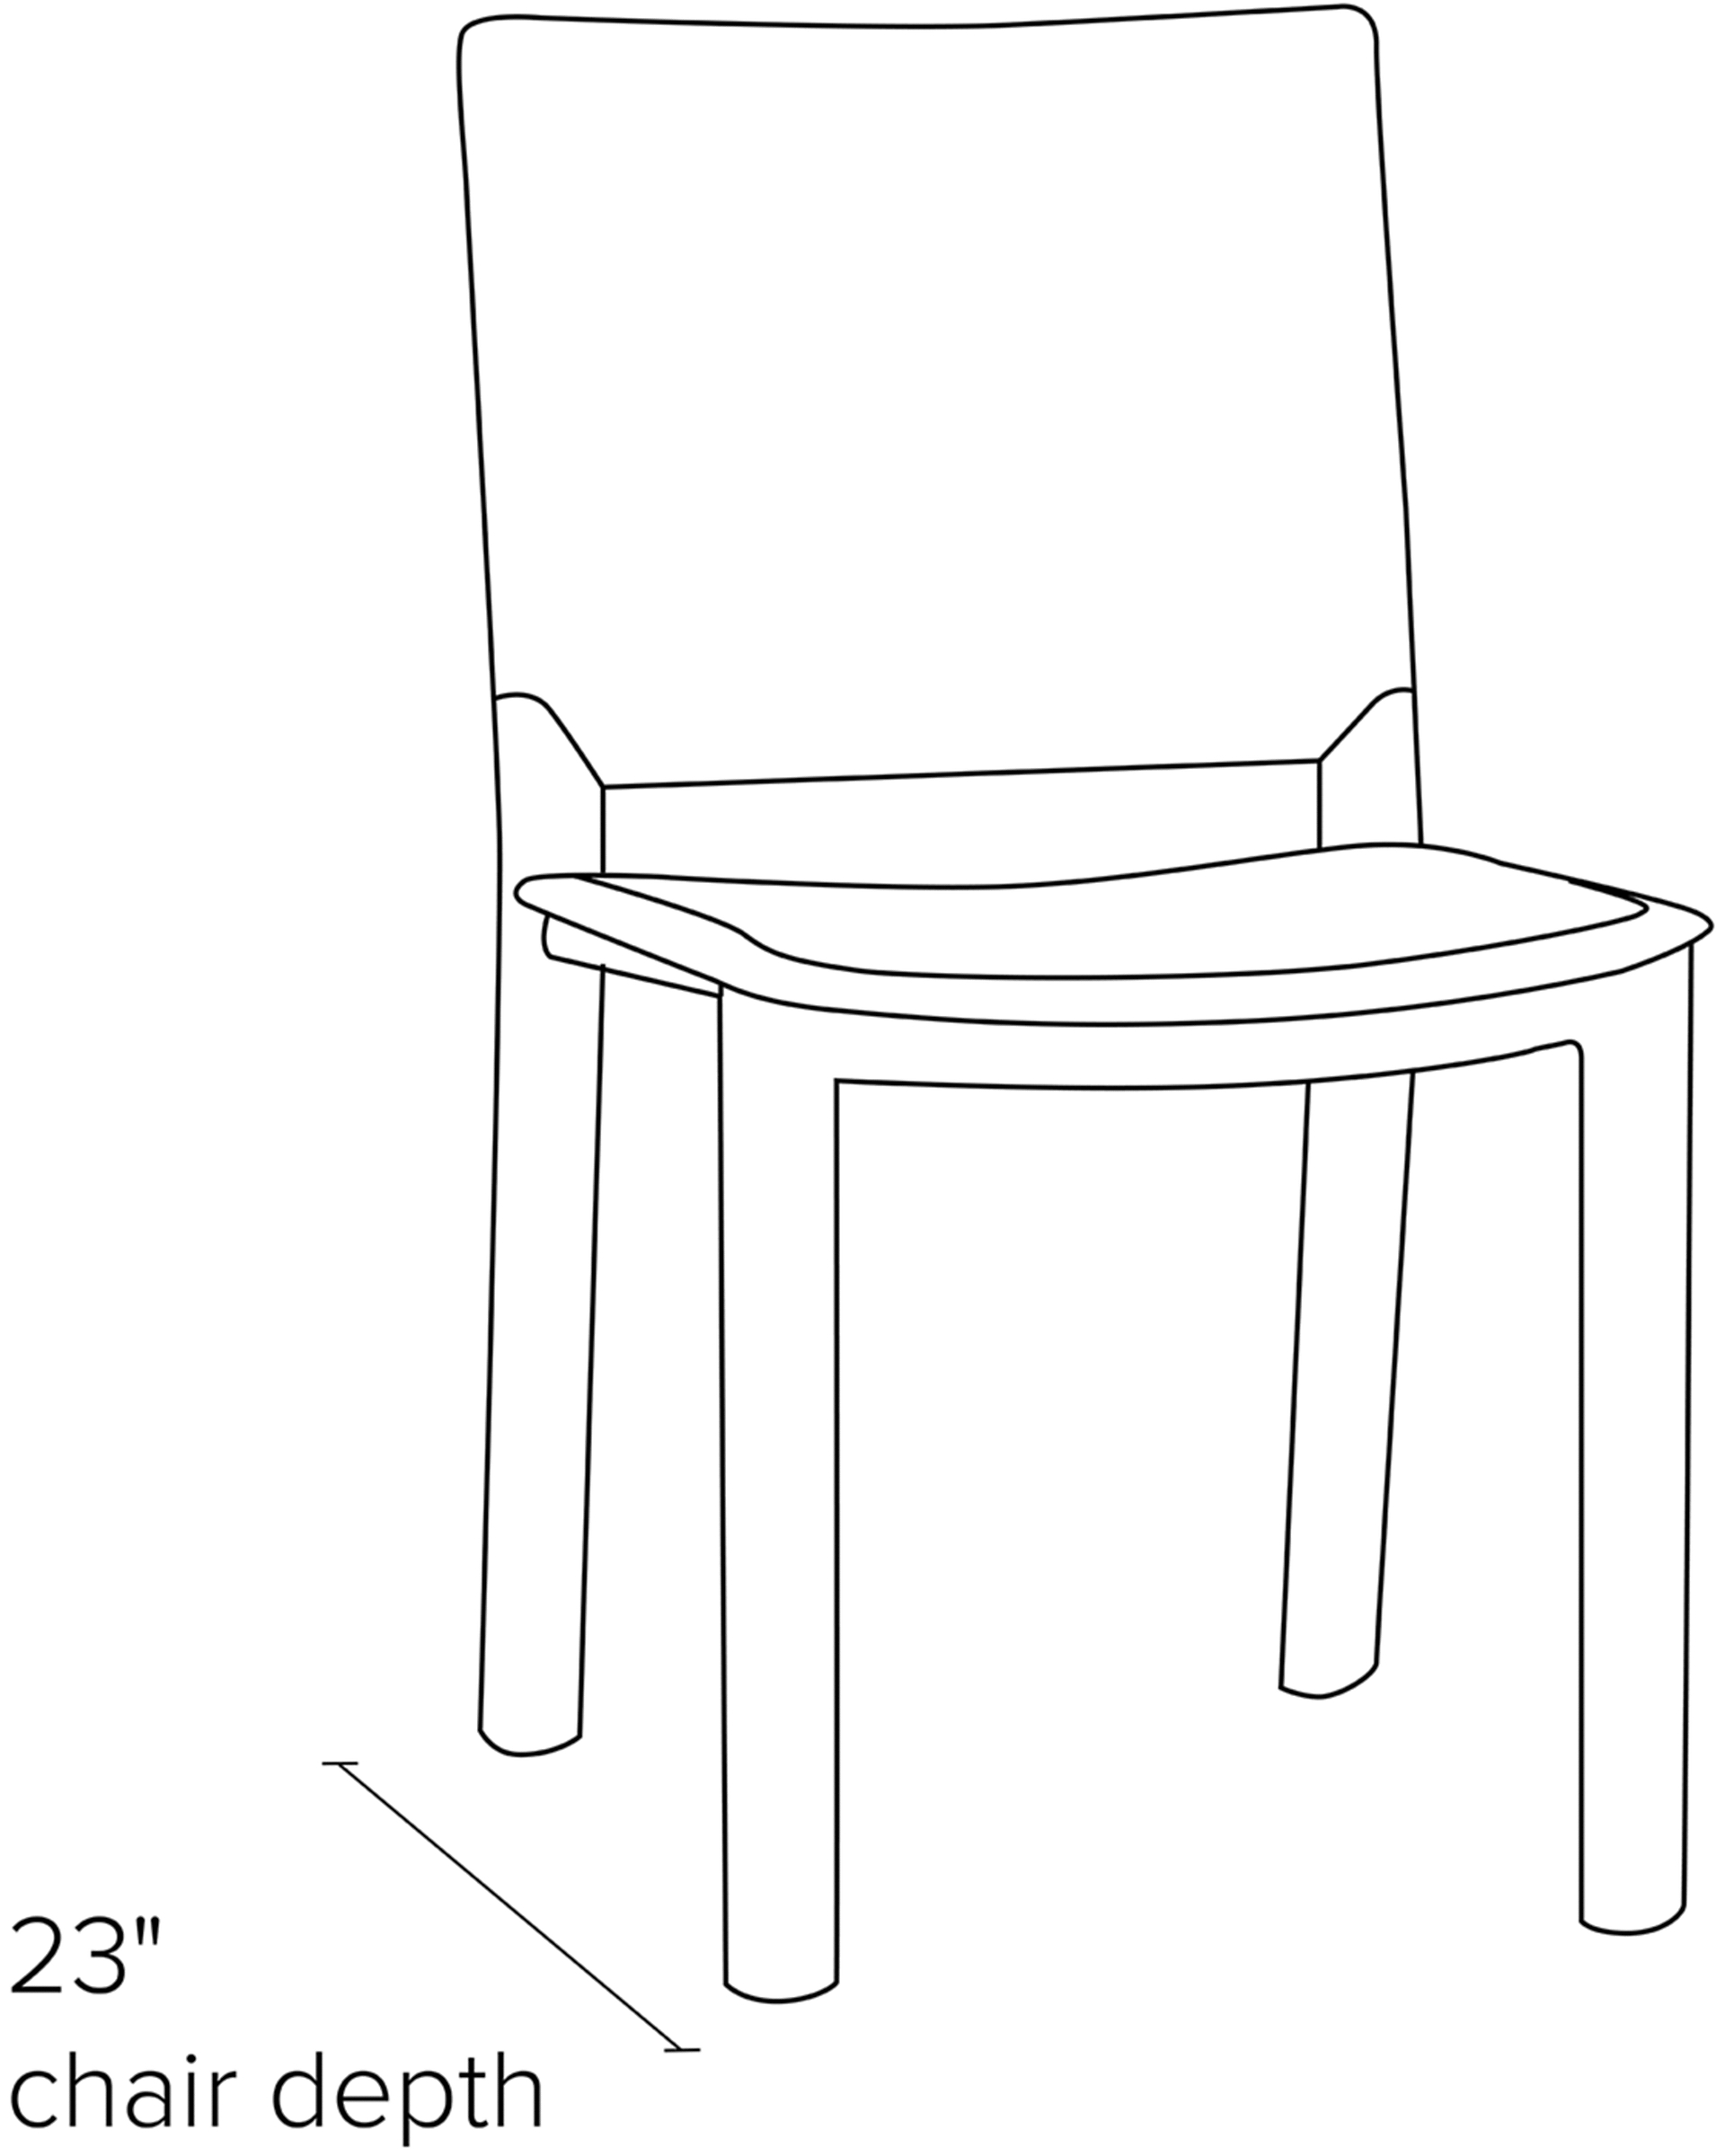 Side view dimension illustration of Madrid side chair.